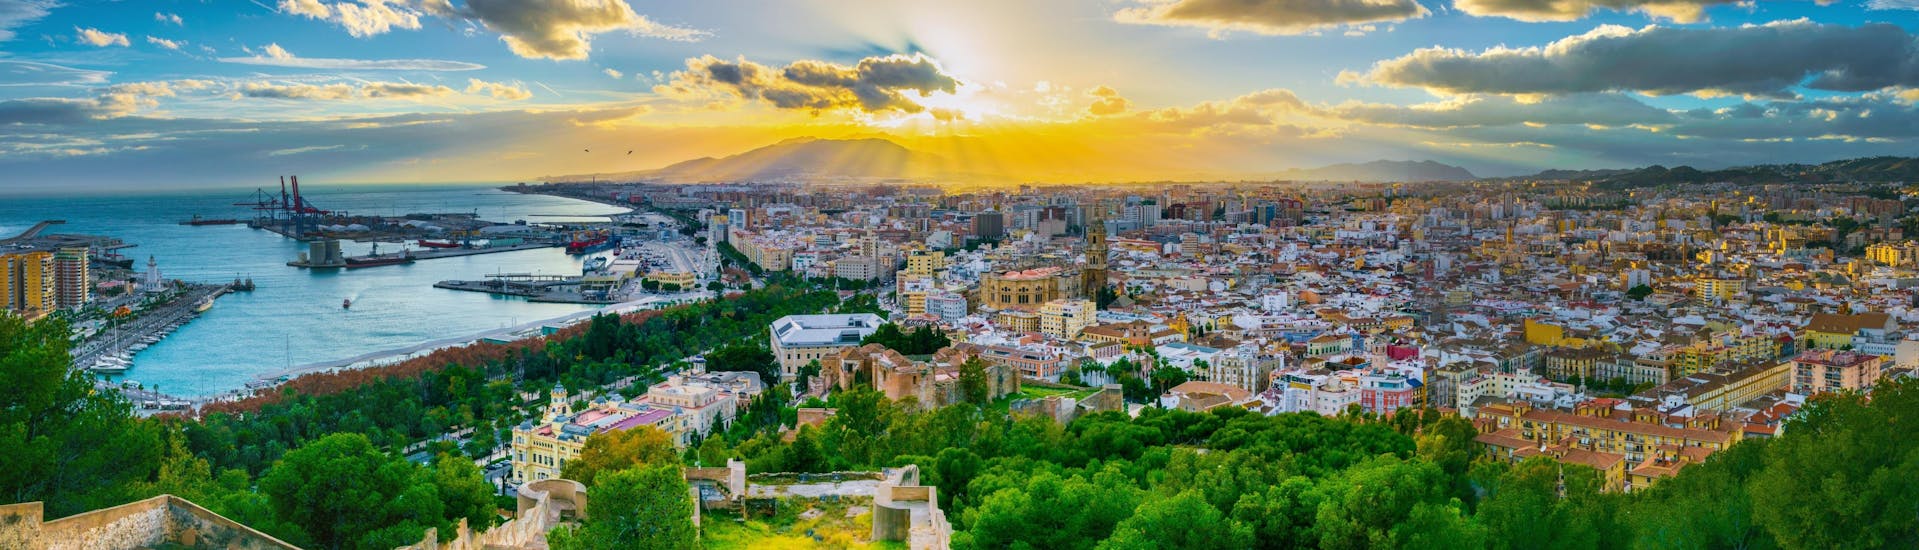 The city of Malaga at sunset with the port in the background.